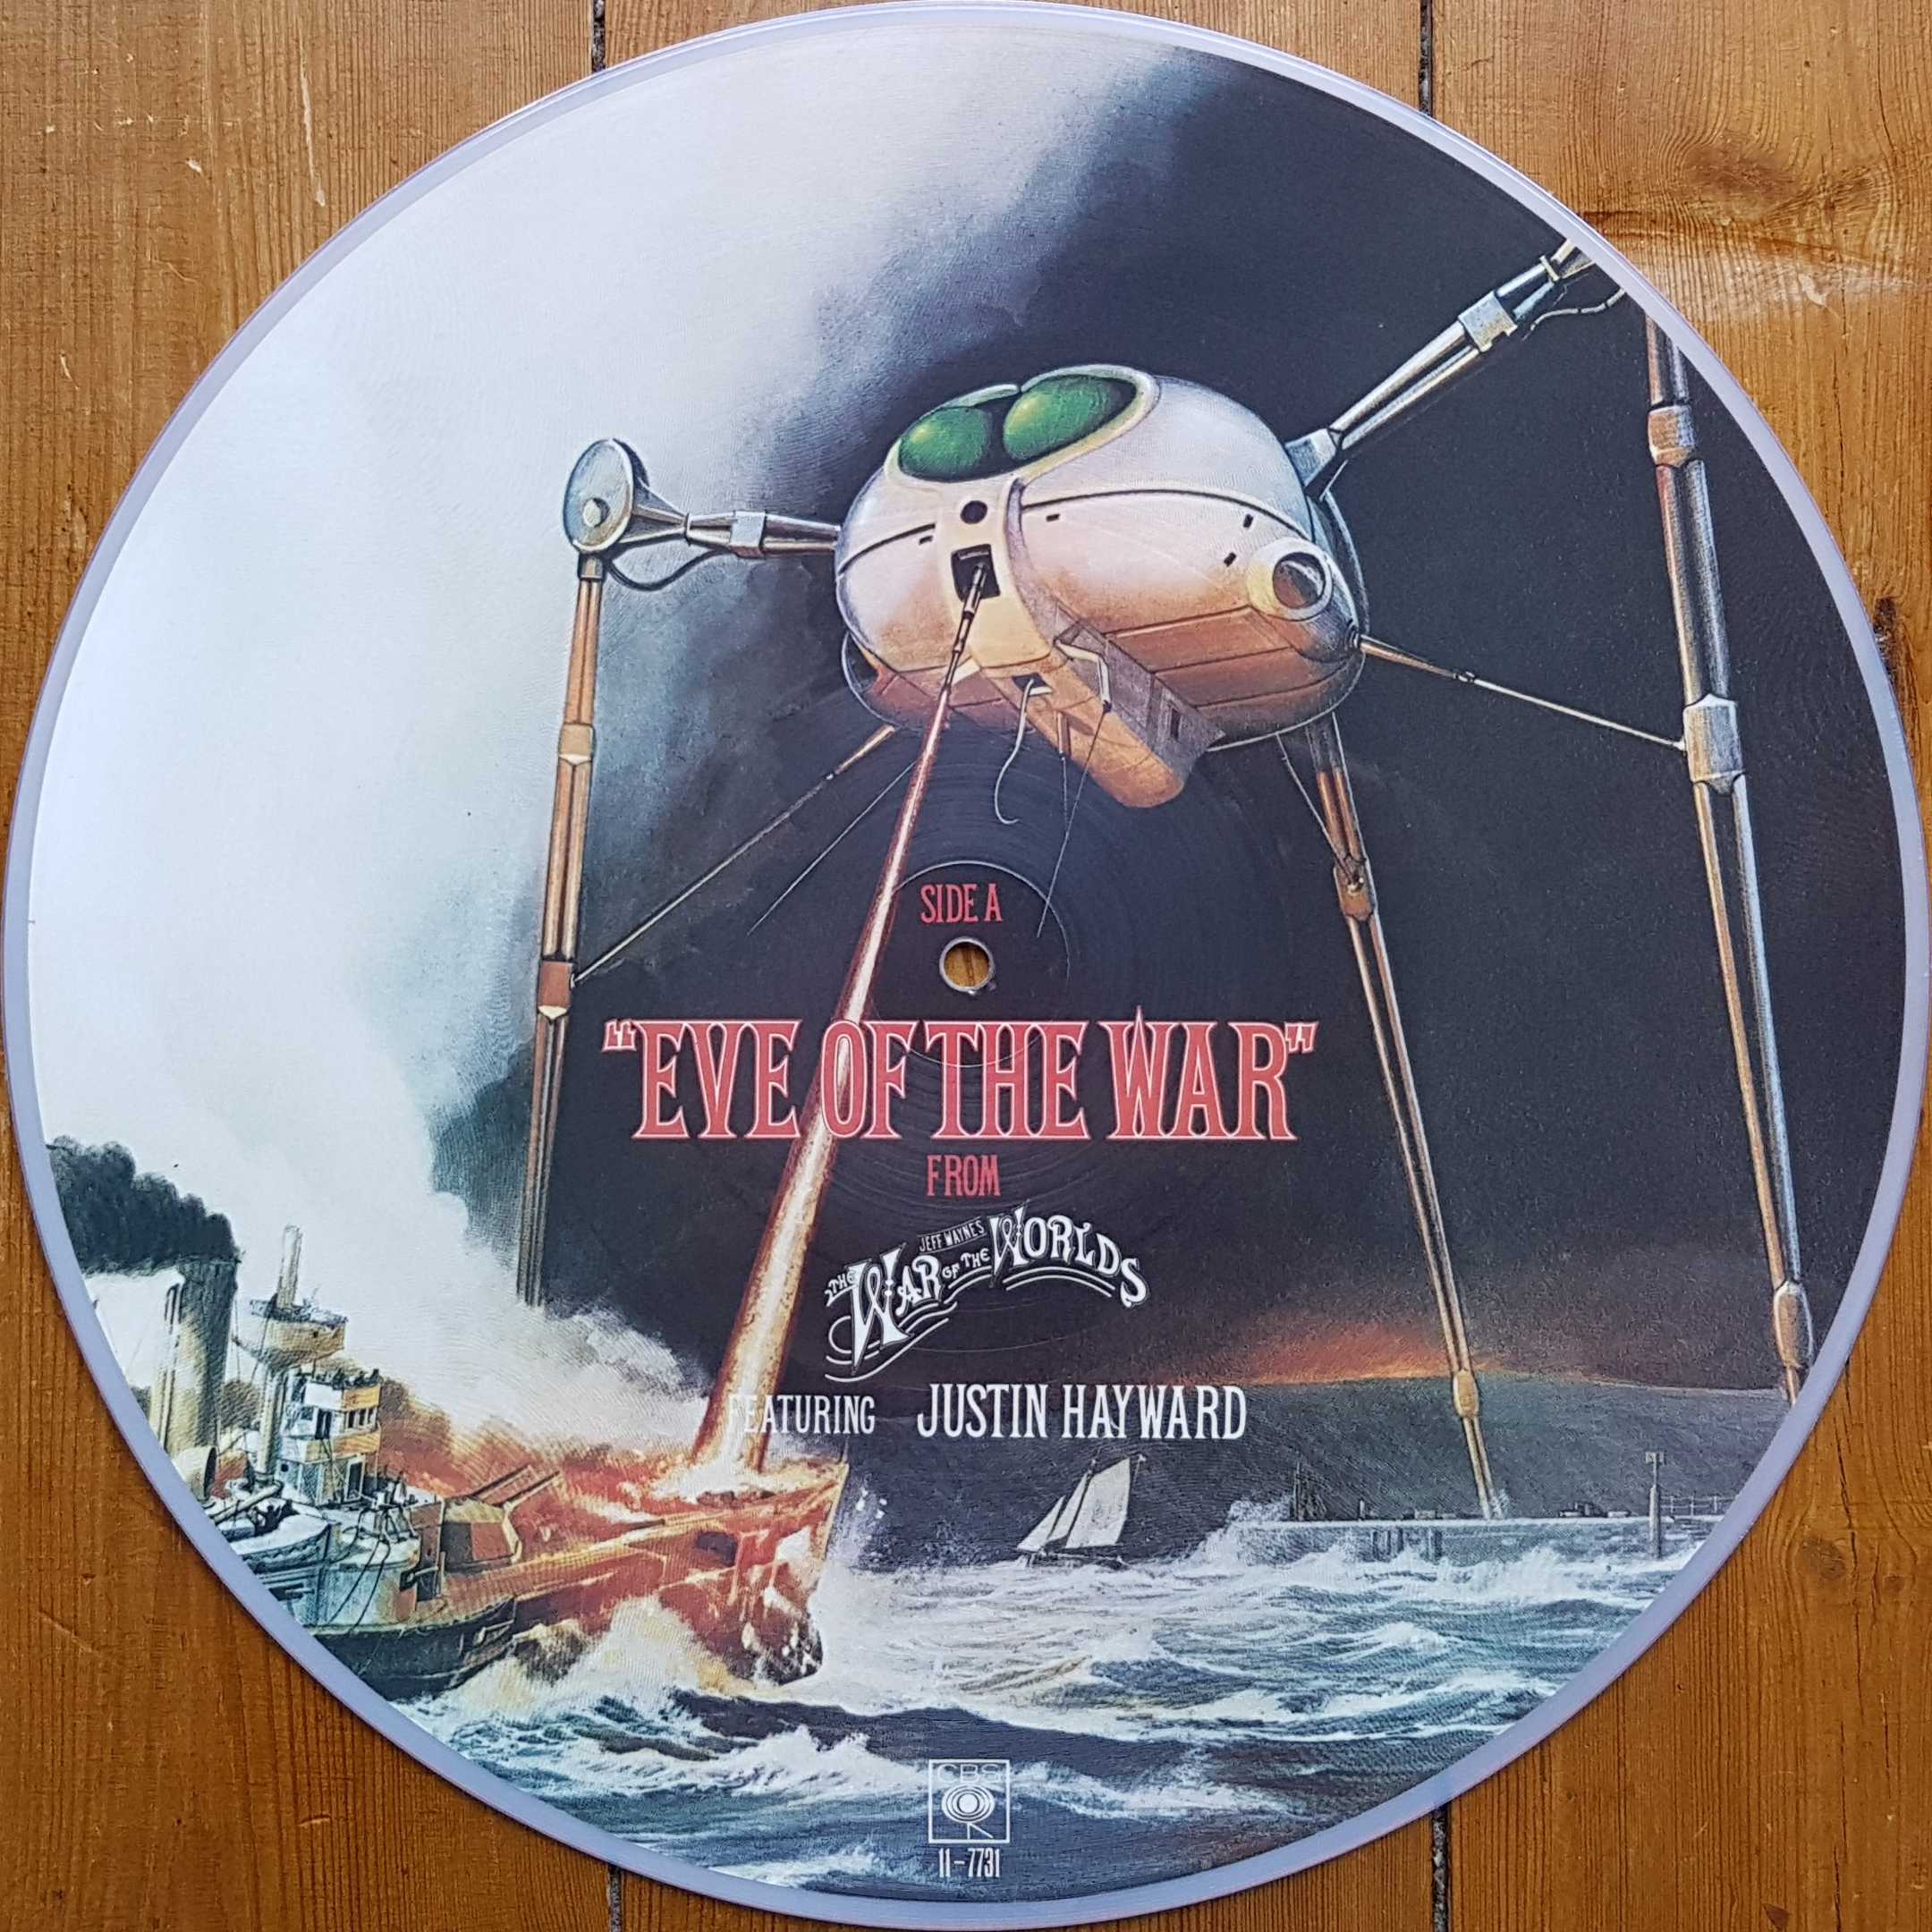 Picture of Eve of war (War of the Worlds) by artist Jeff Wayne / Justin Hayward from ITV, Channel 4 and Channel 5 12inches library